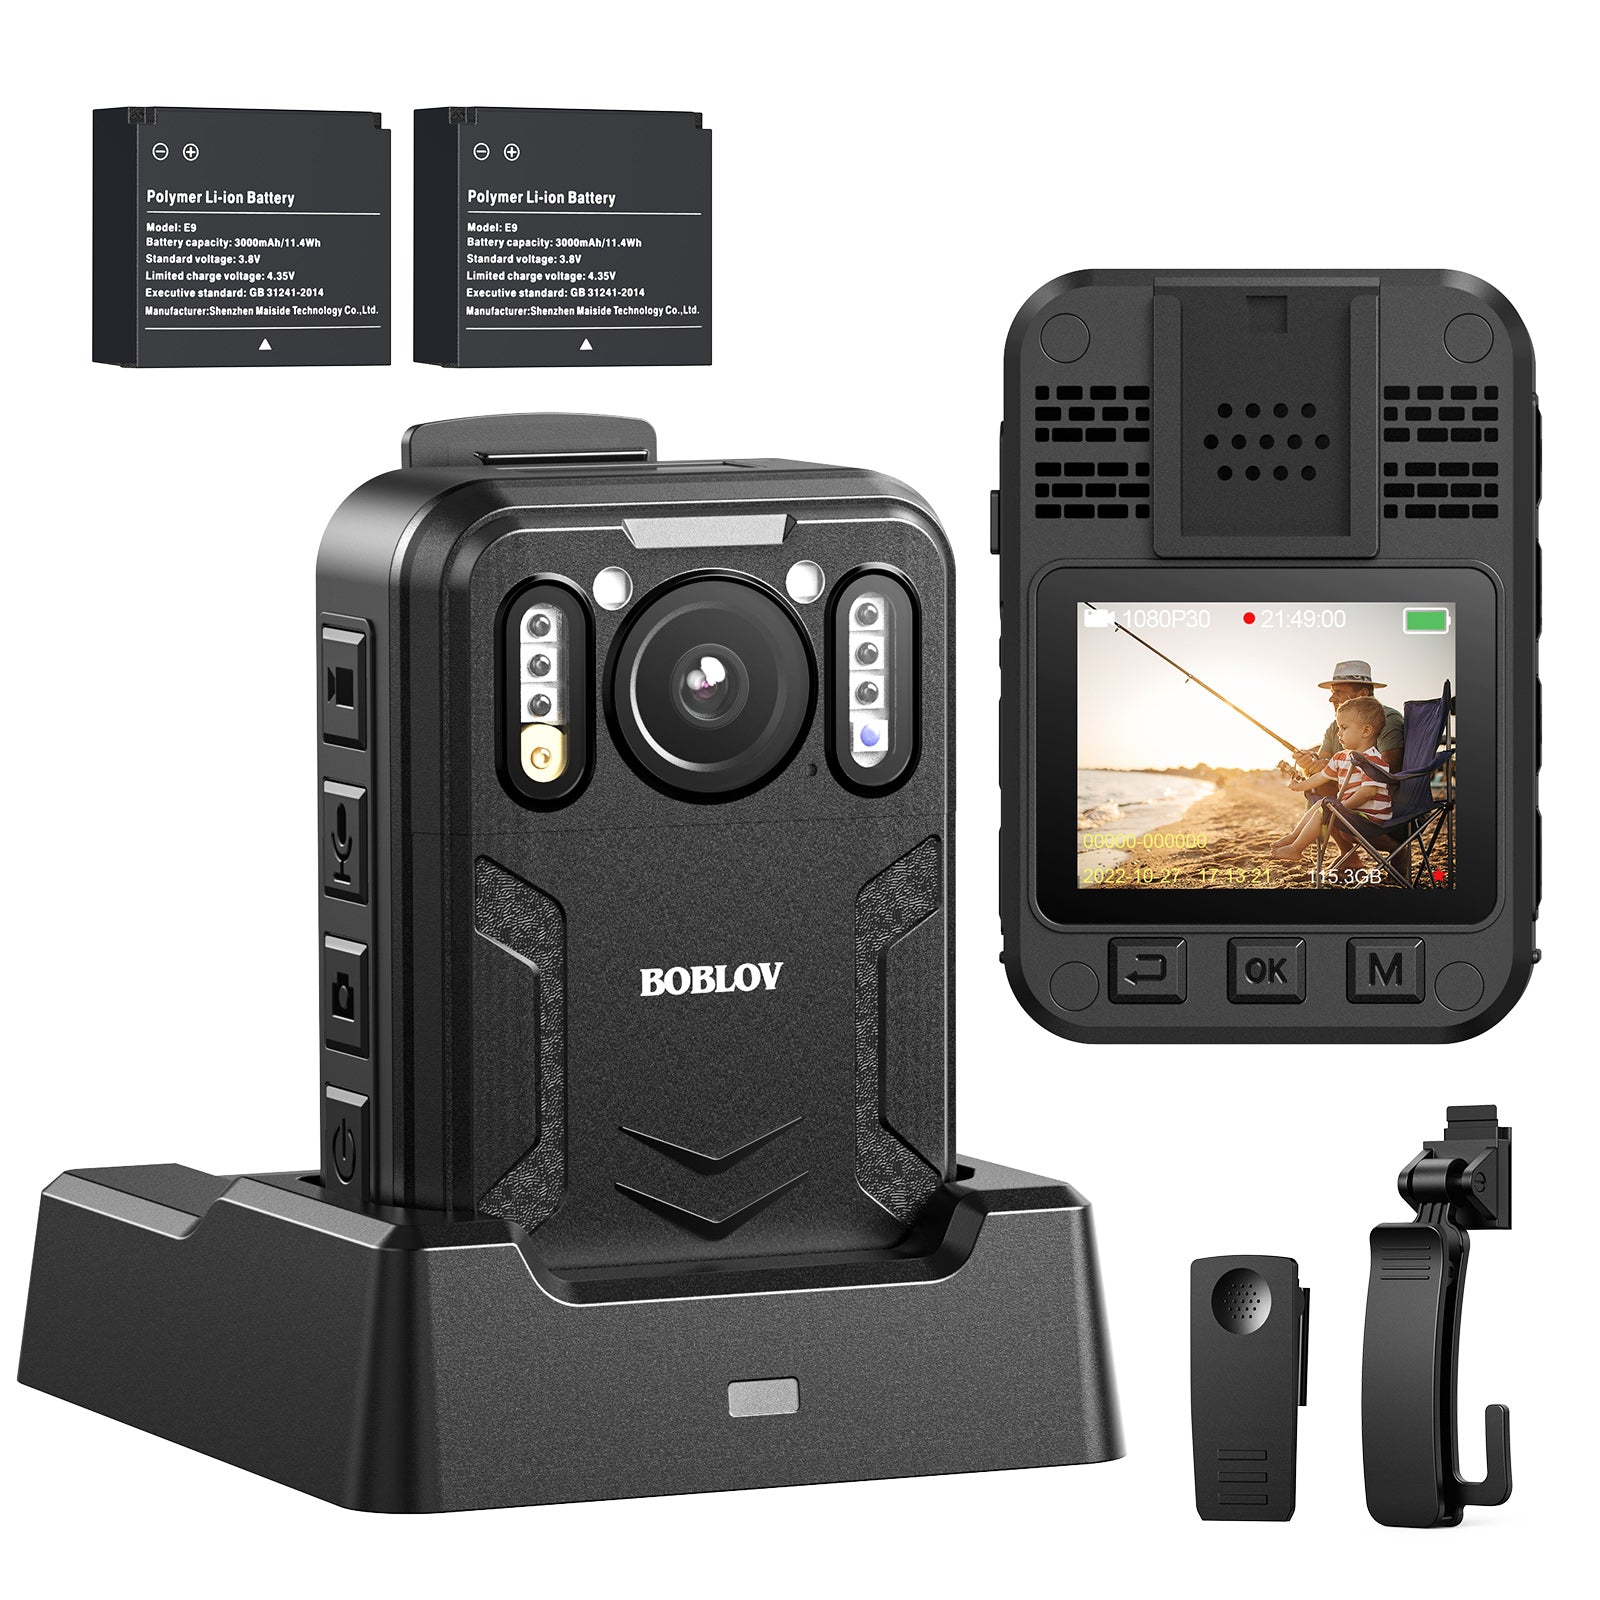 BOBLOV B4K2 4K body camera with GPS and two 3000mAh batteries for extended 14-16 hours recording, including charging dock0